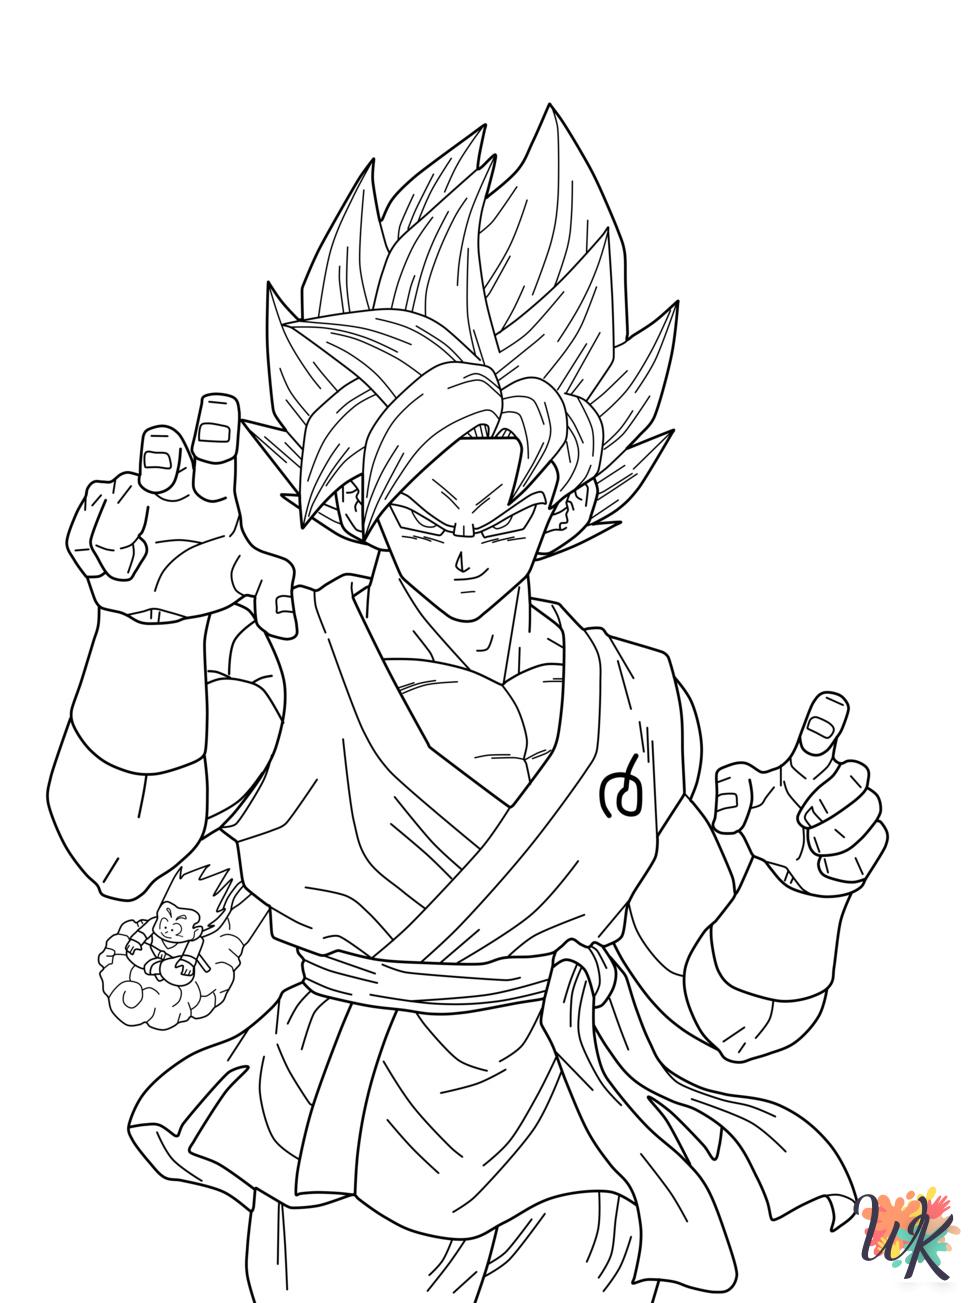 detailed Goku coloring pages for adults